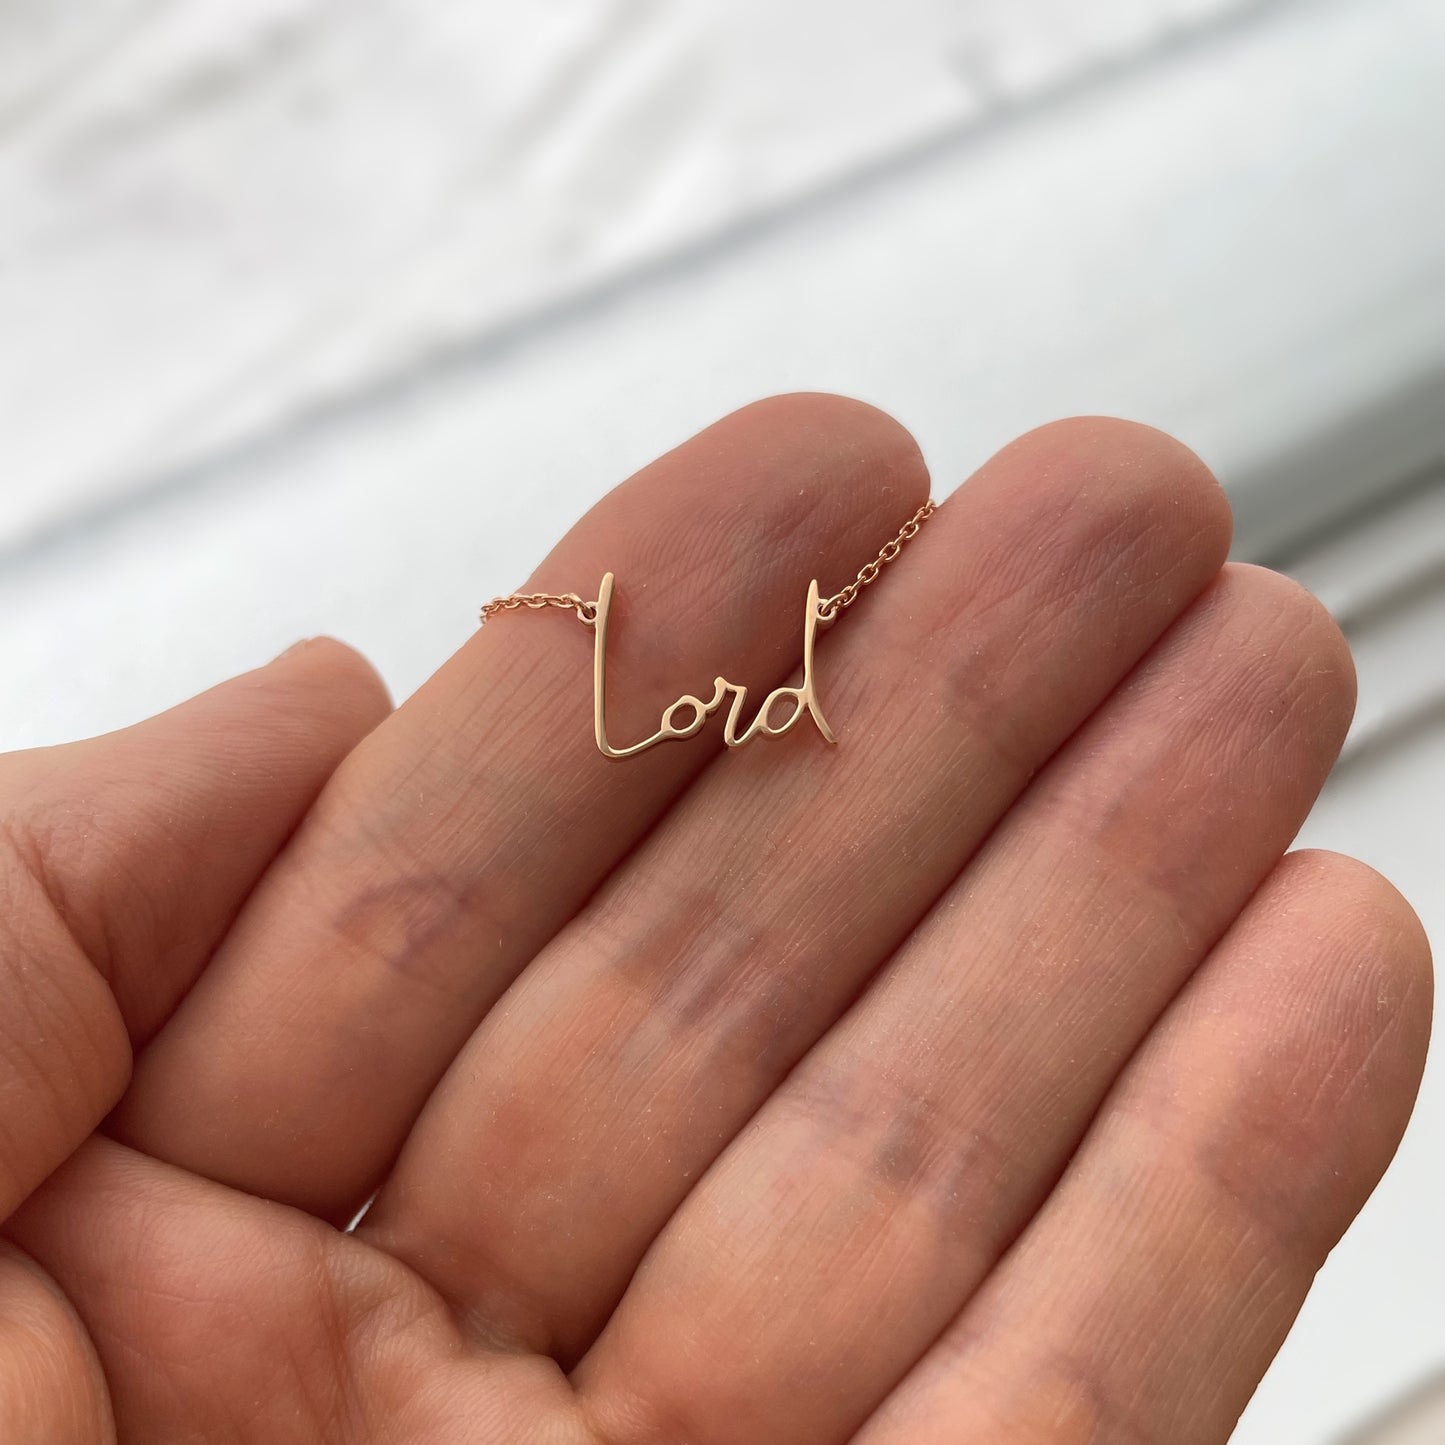 Lord | Pendant Necklace